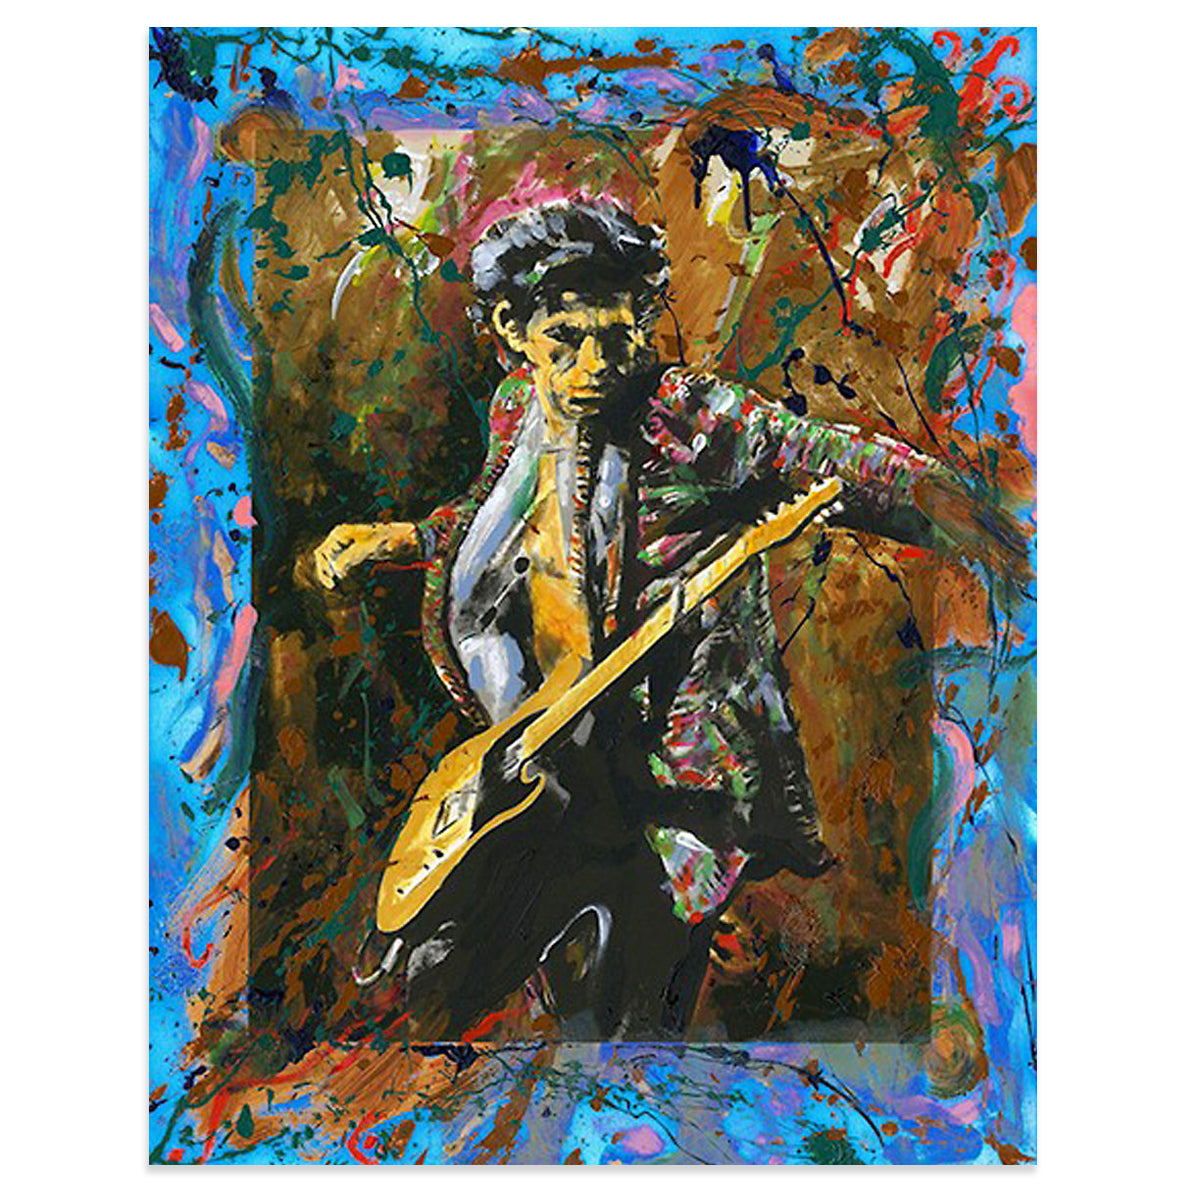 Ronnie Wood - Before They Make Me Run - Collectors Series